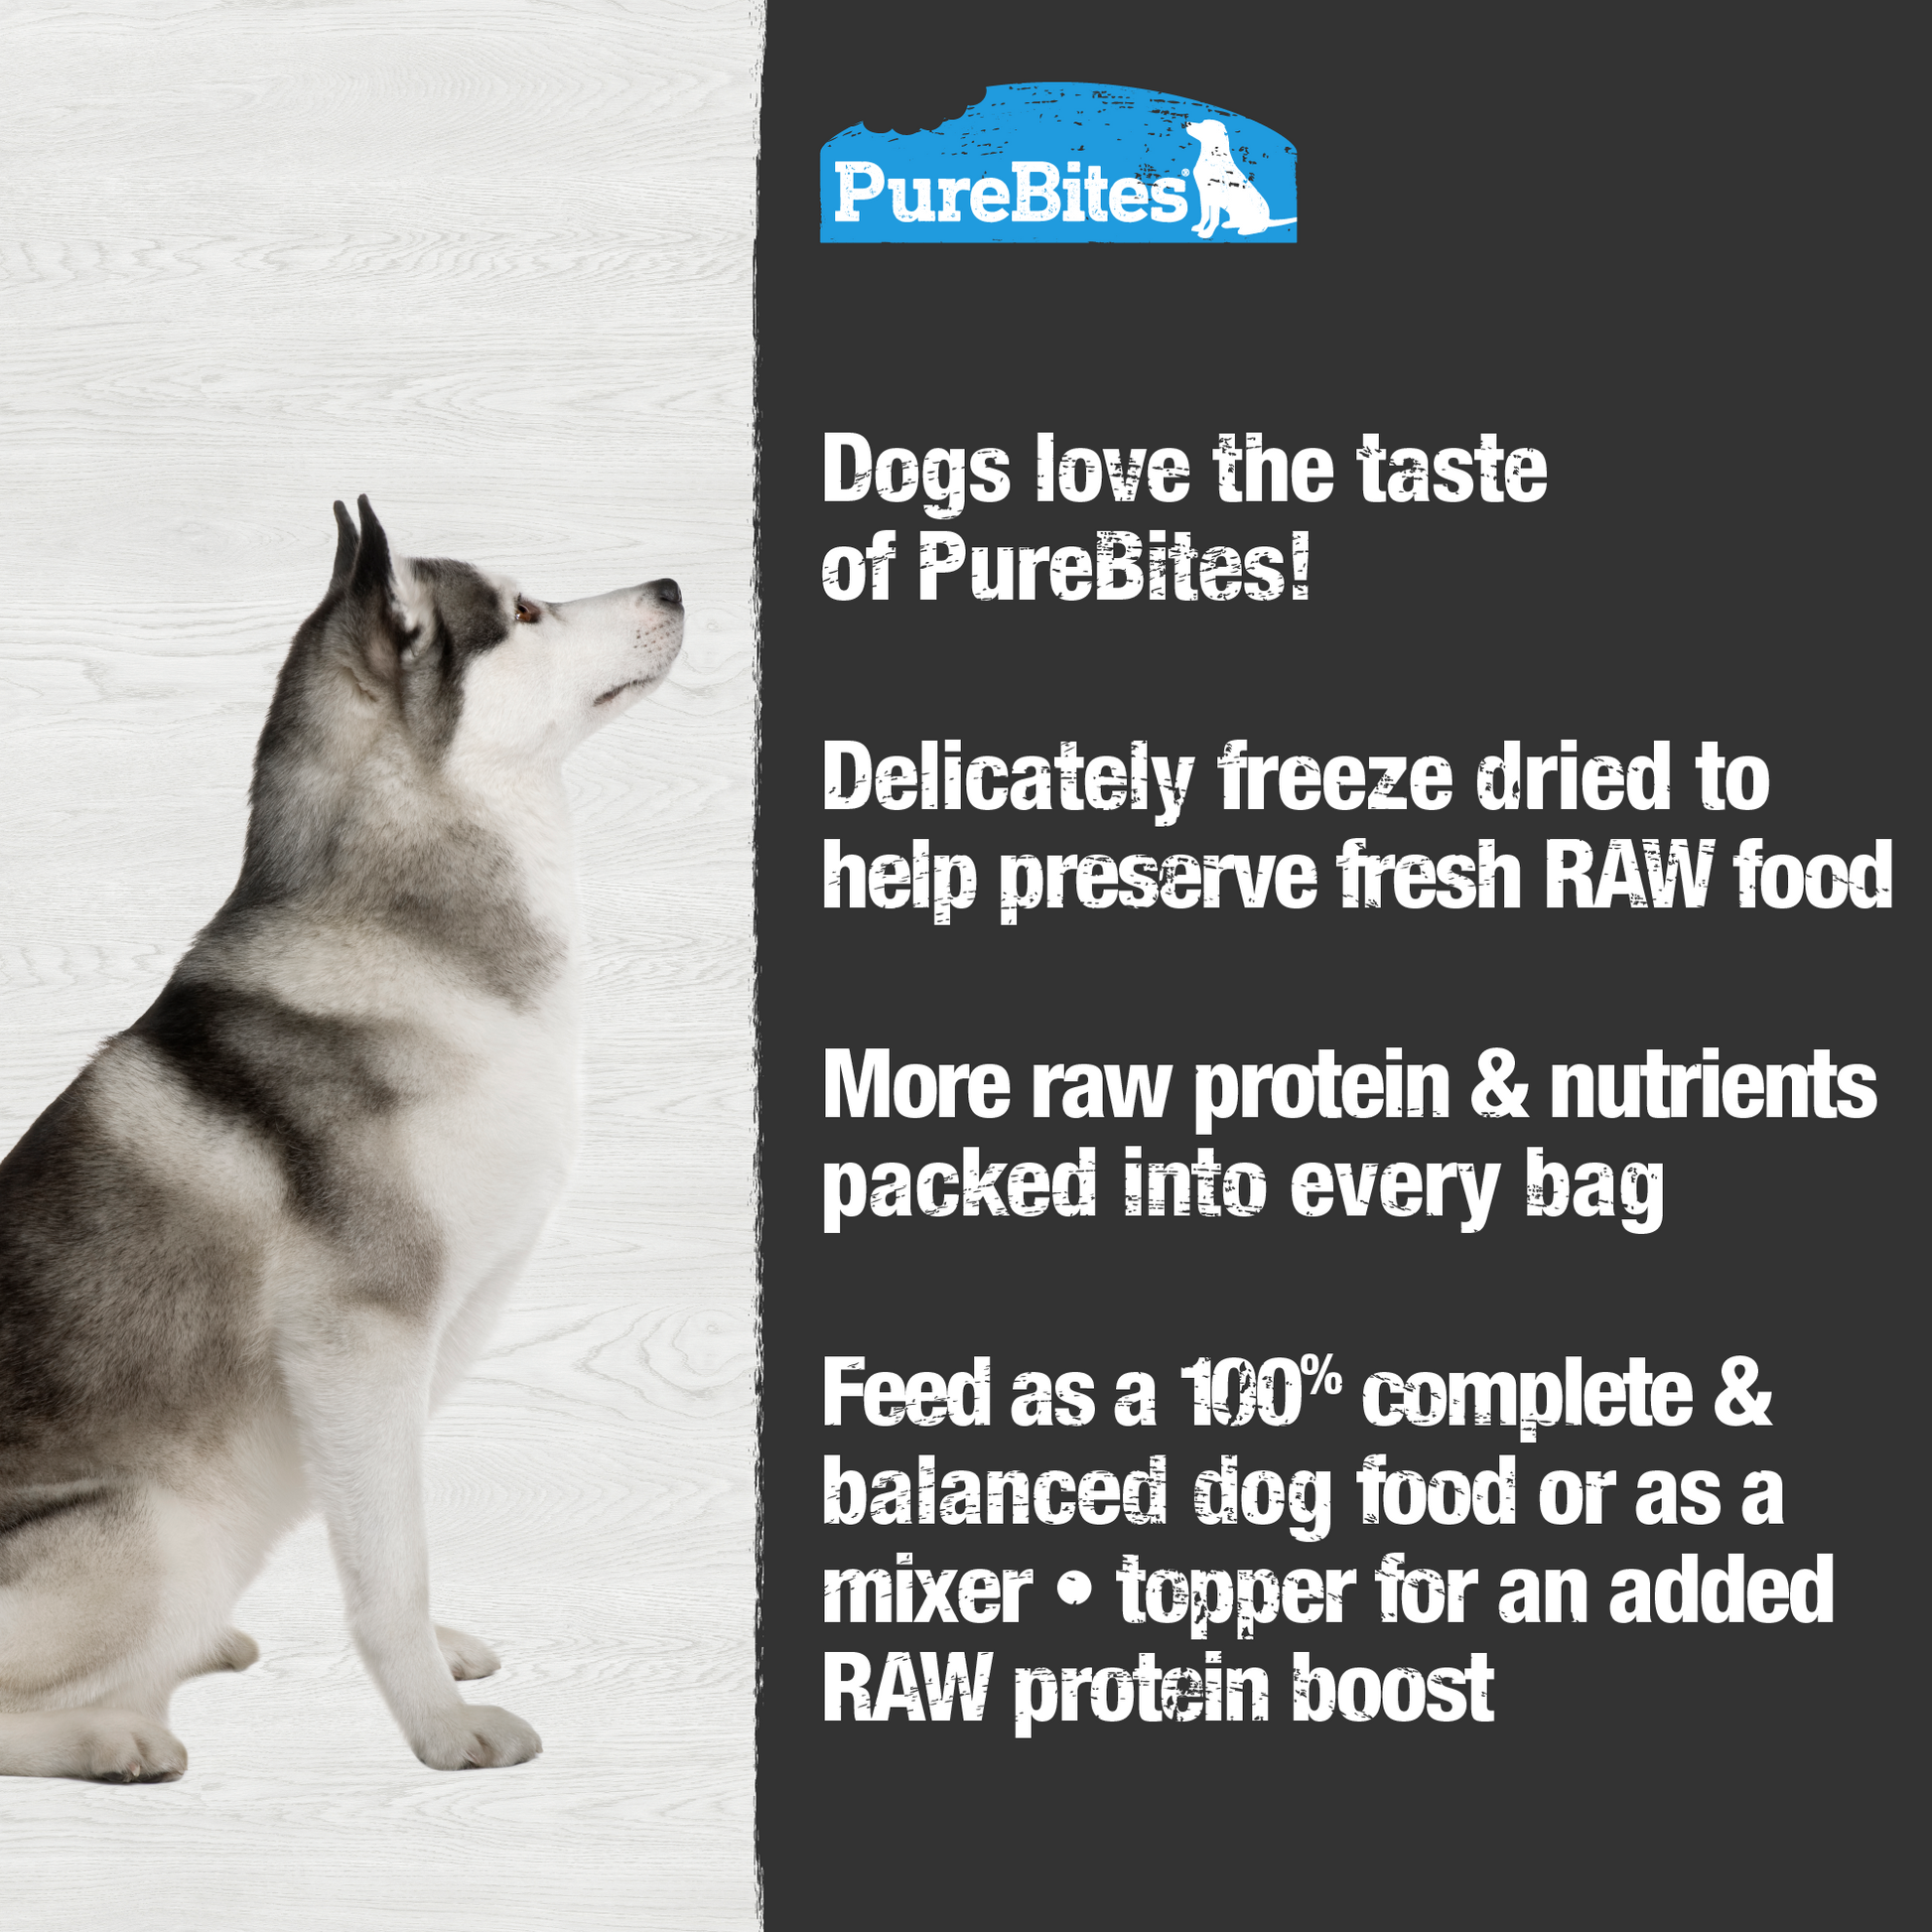 Made fresh & pure means more RAW protein and nutrients packed into every bag. Our lamb recipe food or topper is freeze dried to help preserve the ingredient's RAW taste, and nutrition, and mirror a dog’s ancestral diet